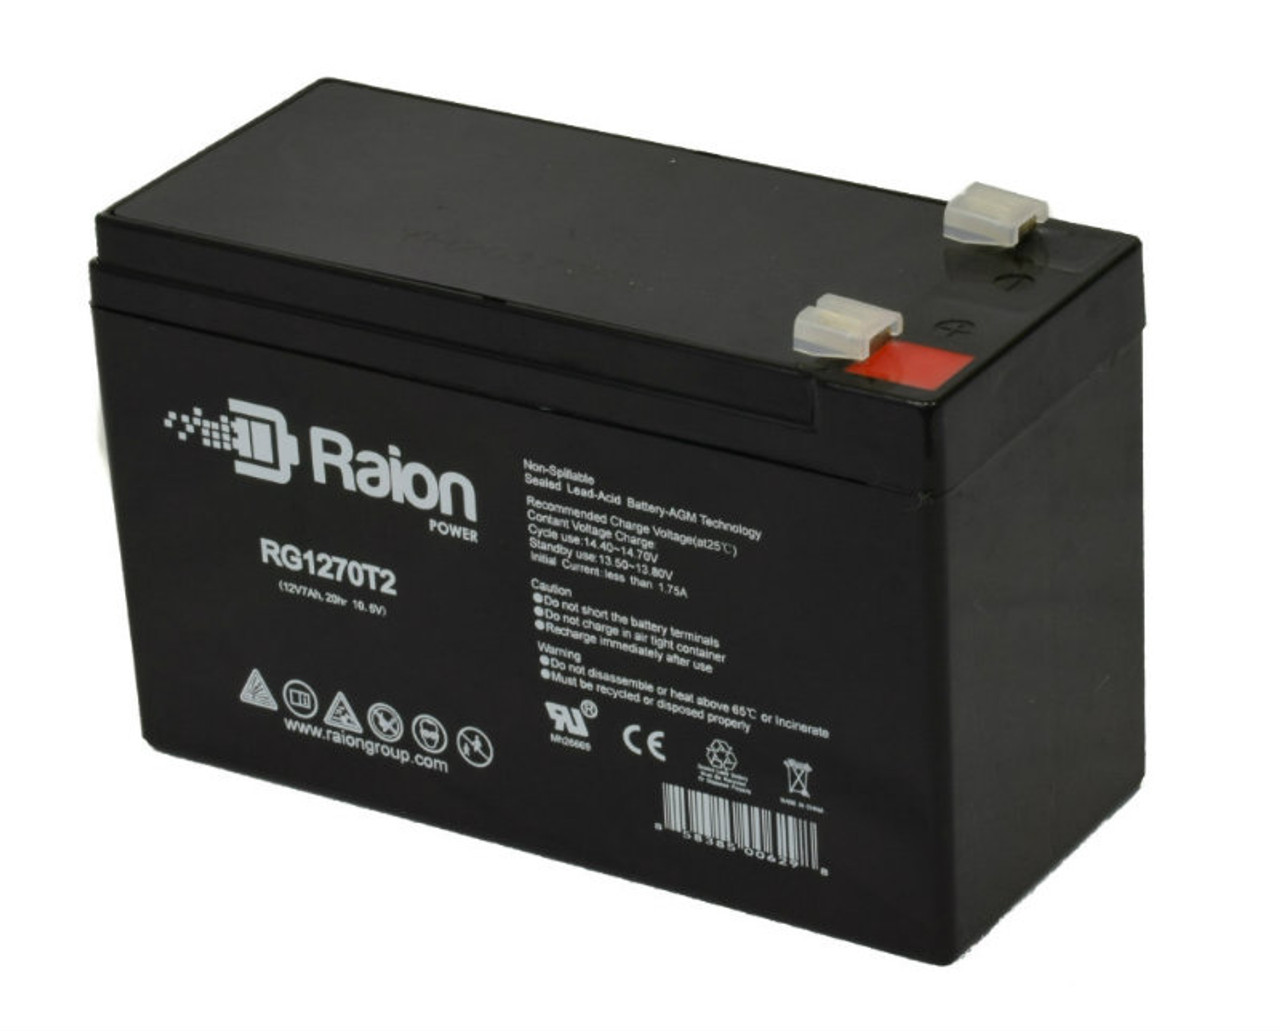 Raion Power RG1270T2 12V 7Ah Rechargeable Battery for OzCharge OCB-7.2-12-NBN